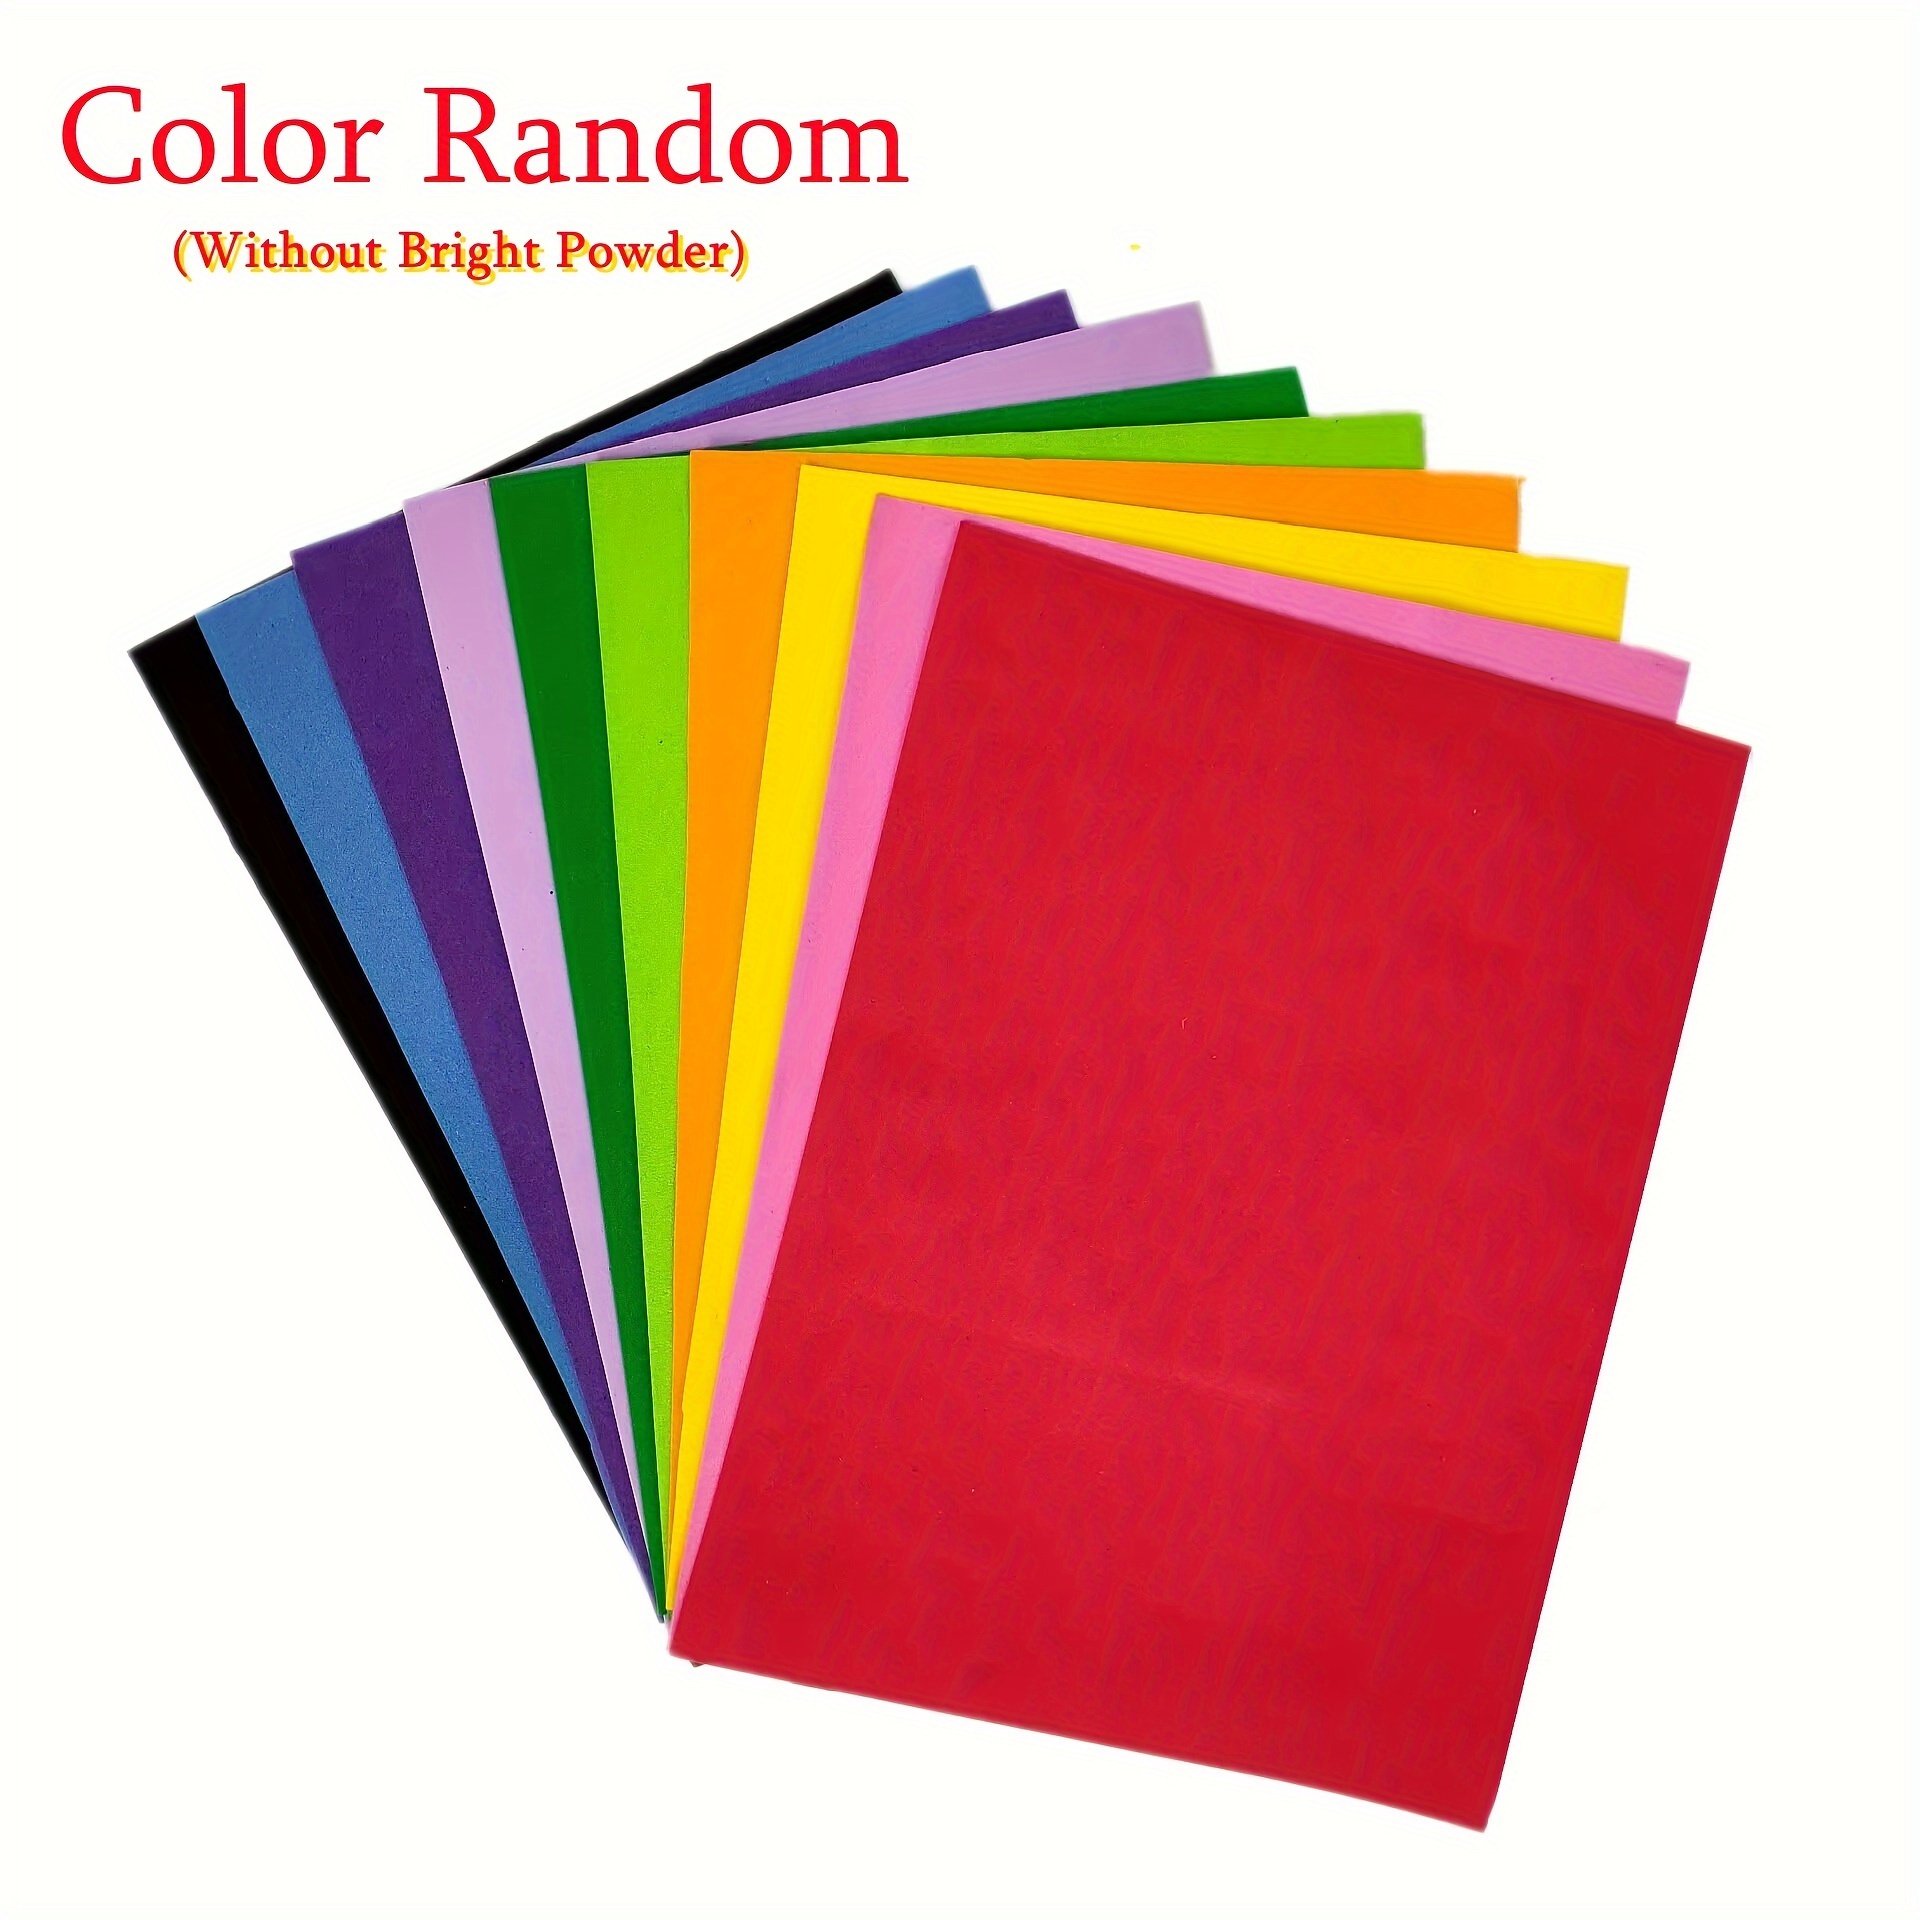 A4 Funky Foam Craft Sheets A4 Assorted Colourful Pack of 10 